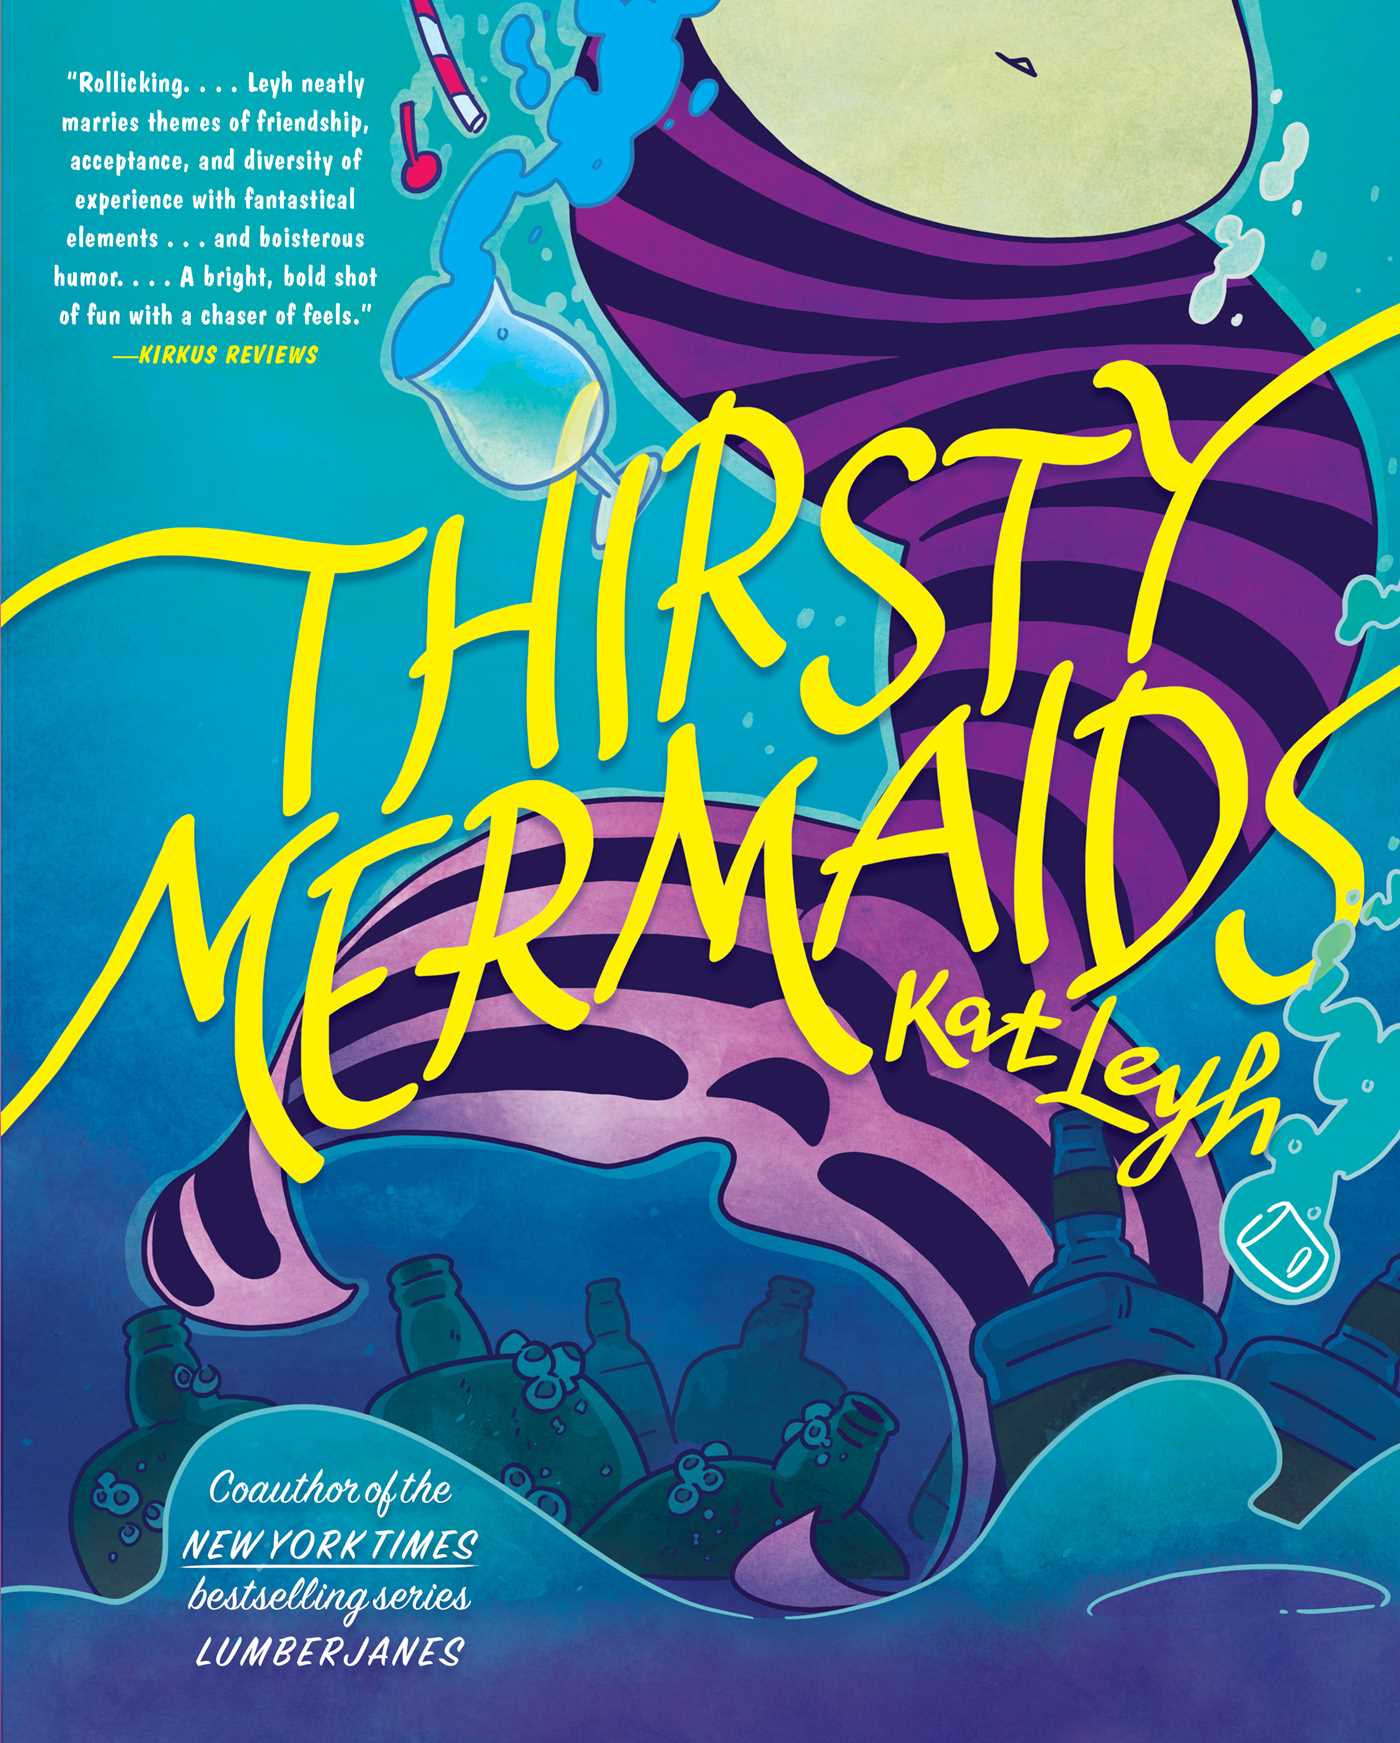 The cover of THRISTY MERMAIDS features a pink-and-purple striped mermaid tail on a blue-and-purple watercolor background. A shotglass and a coupe glass are falling through the water around the tail.